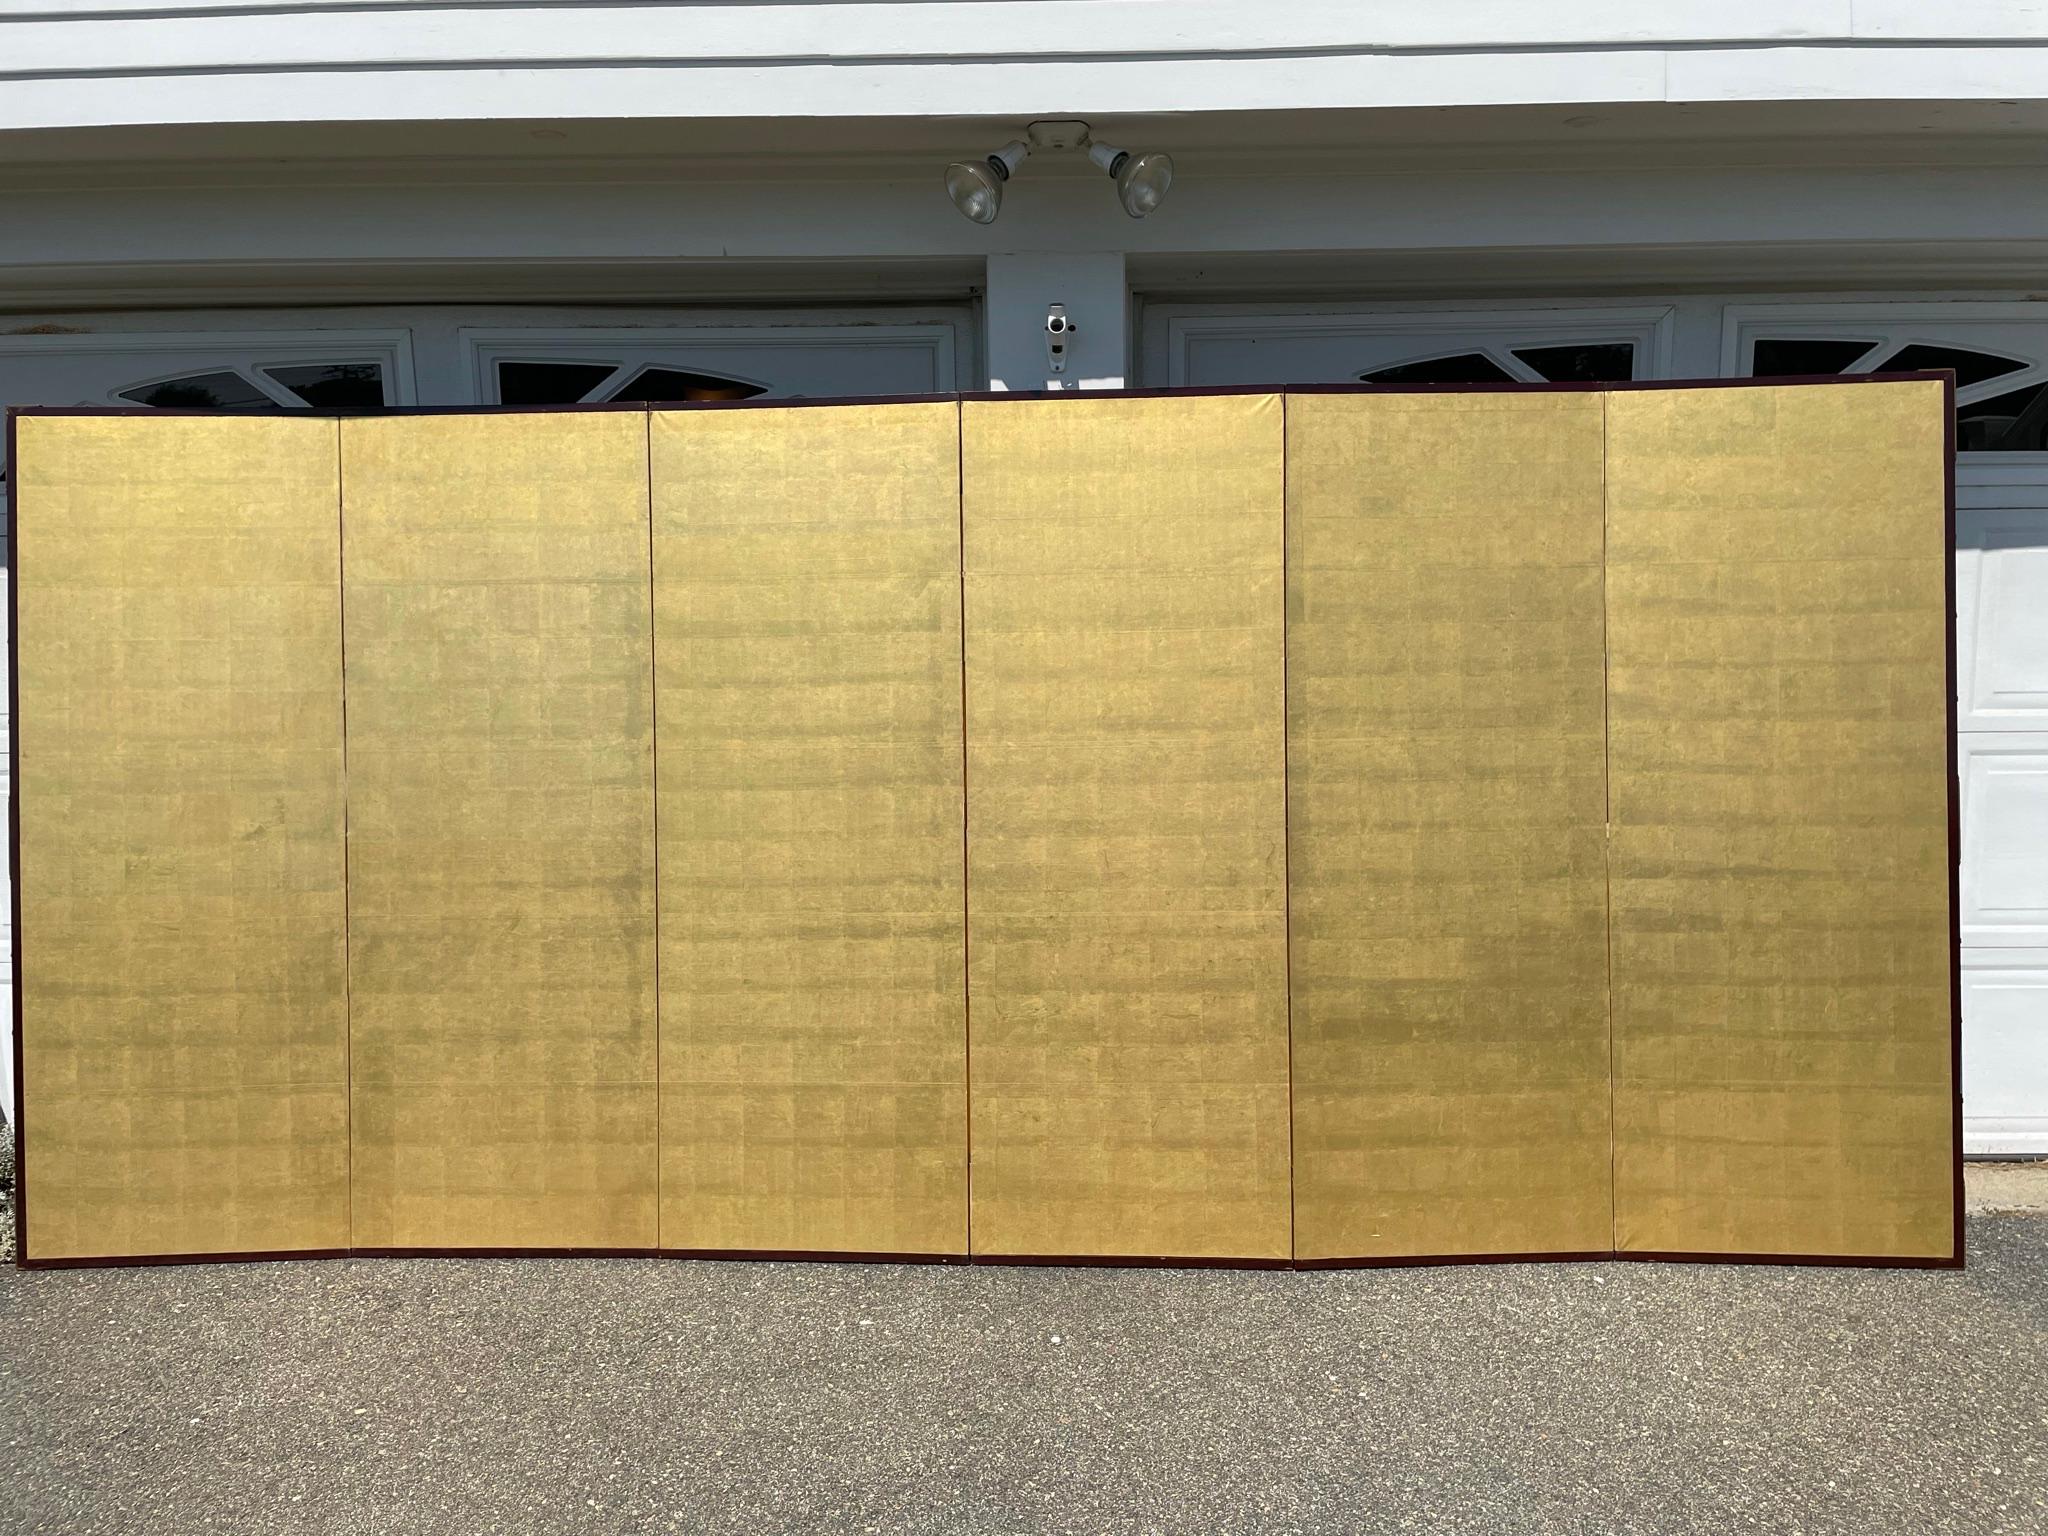 From our recent Japanese Acquisitions

Fashioned by hand in stunning gold leaf.

Japan, a fine six-panel screen byobu carefully crafted by a professional artisan with hand applied gold leaf. This attractive screen dates to the Meiji period,